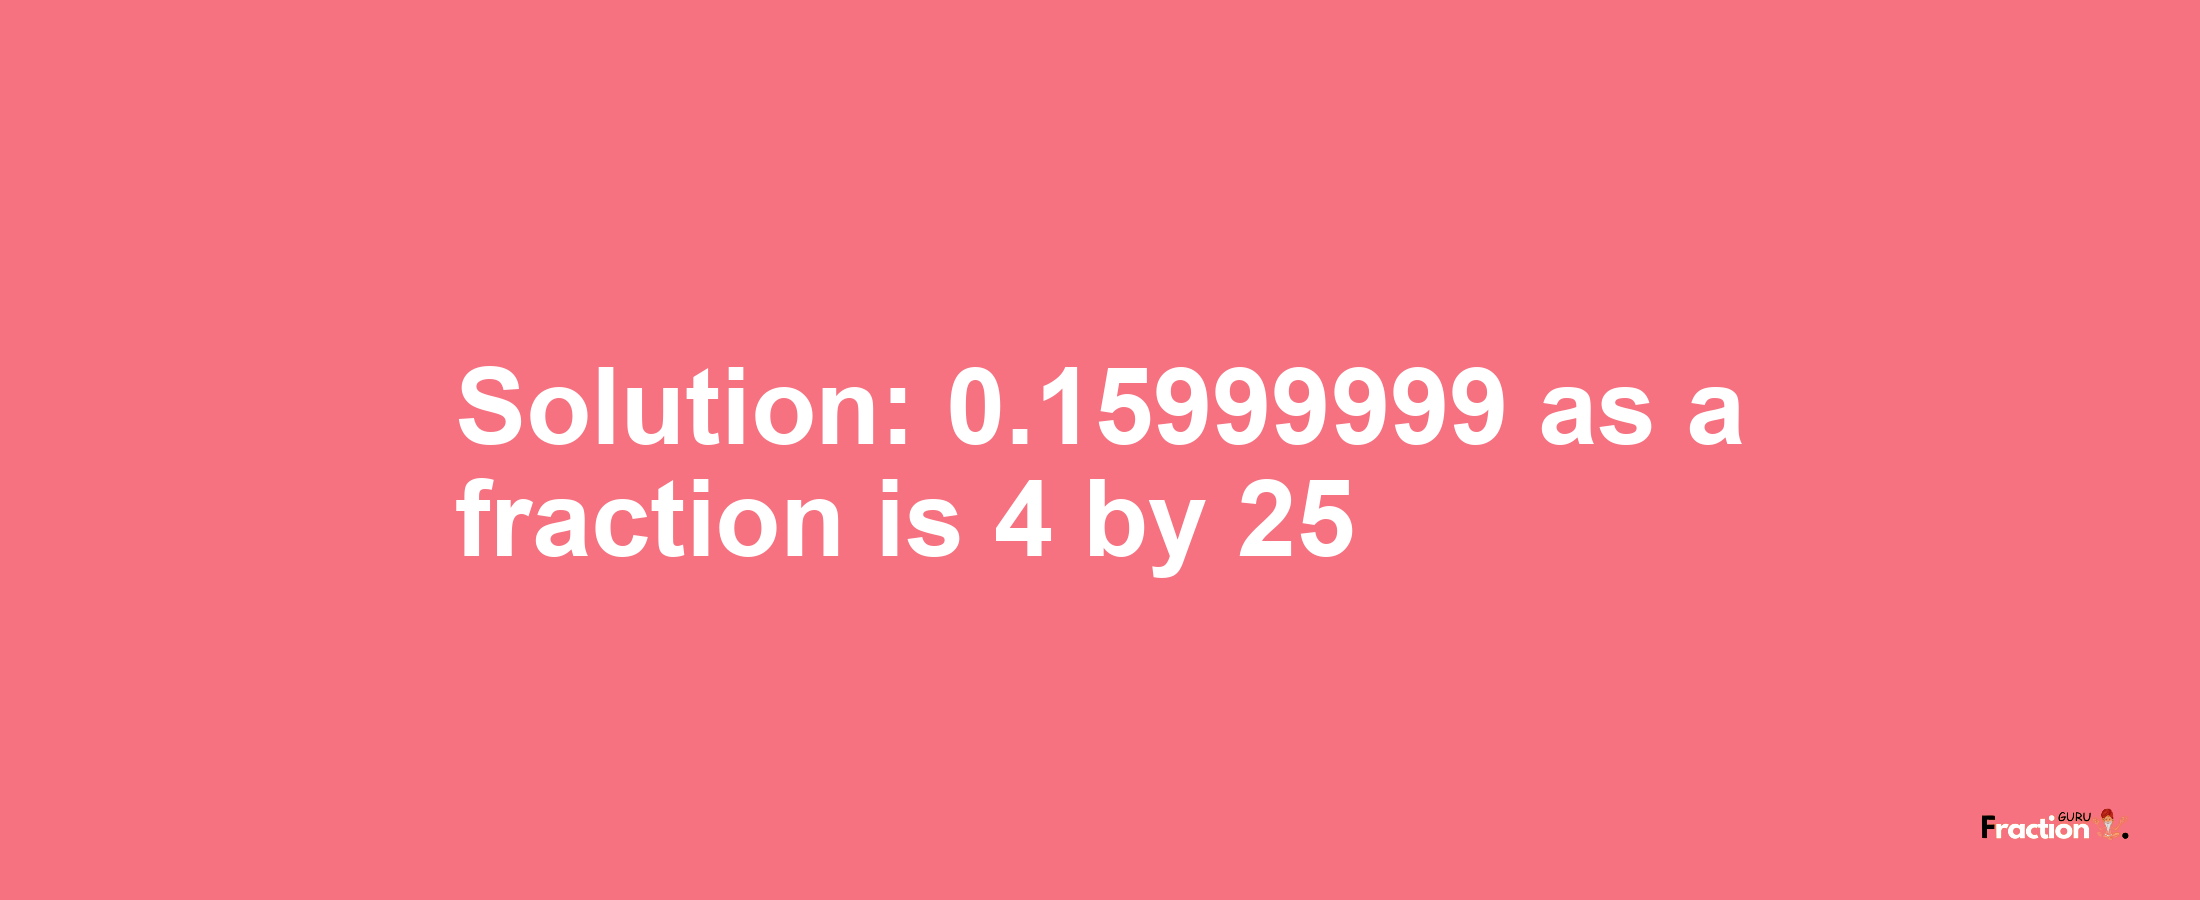 Solution:0.15999999 as a fraction is 4/25